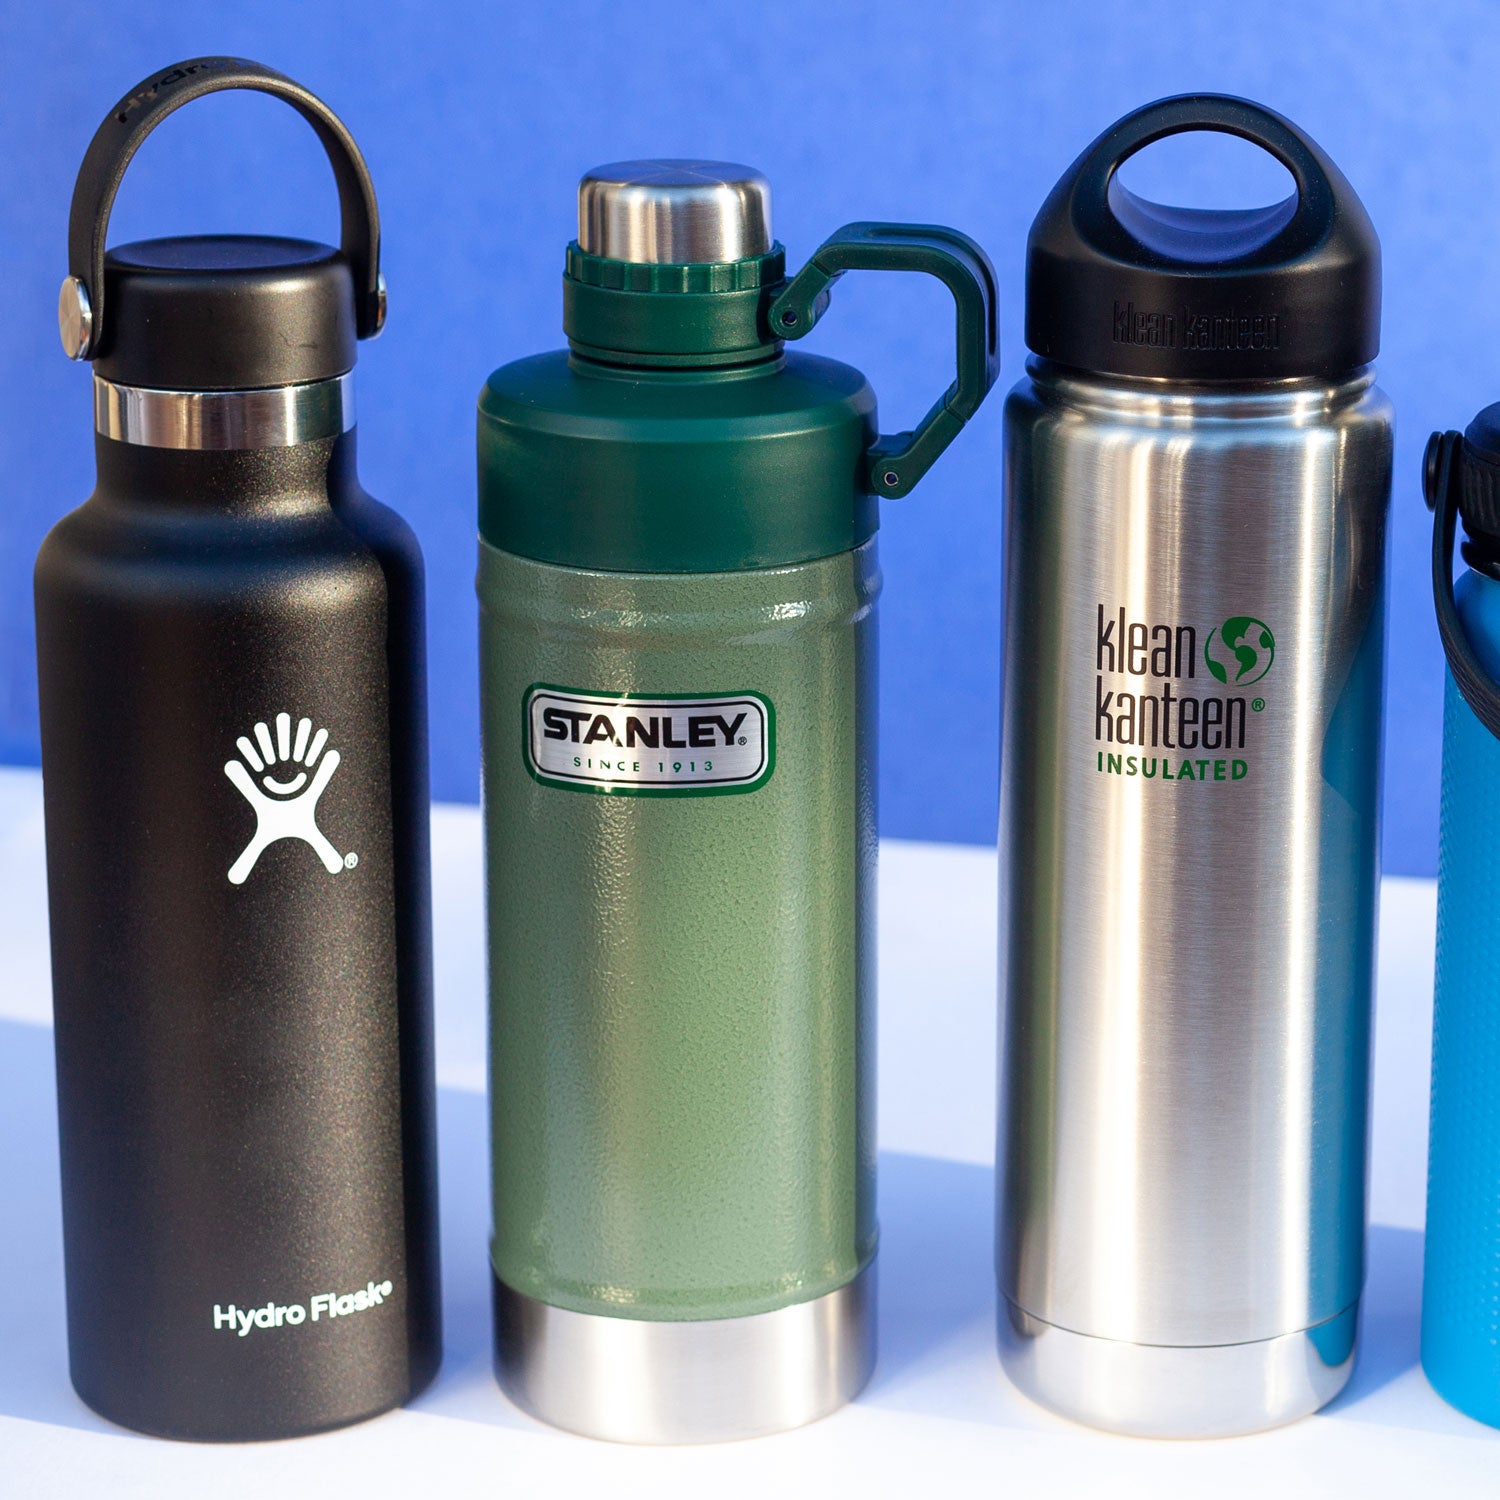 Ranking the Best Midsize Insulated Water Bottles